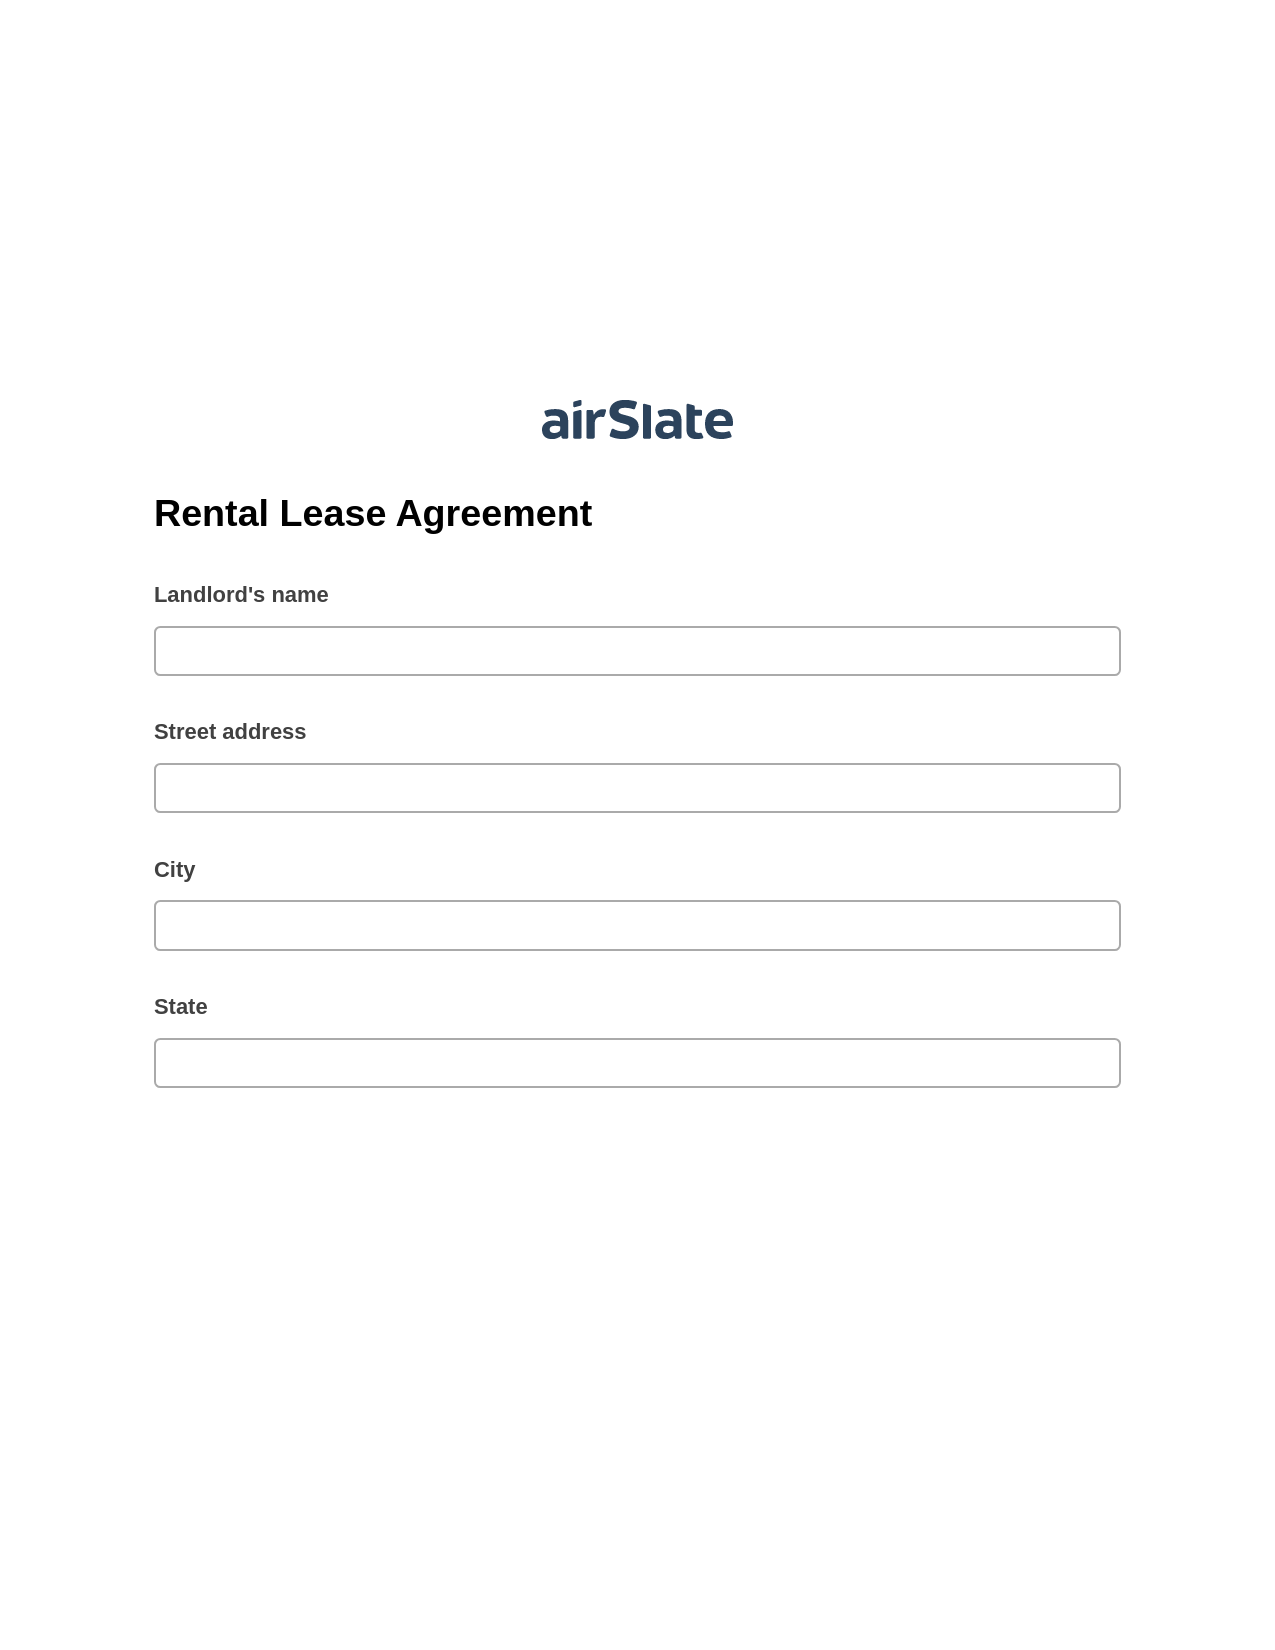 Rental Lease Agreement System Bot - Slack Two-Way Binding Bot, Document Hide Bot, Archive to SharePoint Folder Bot